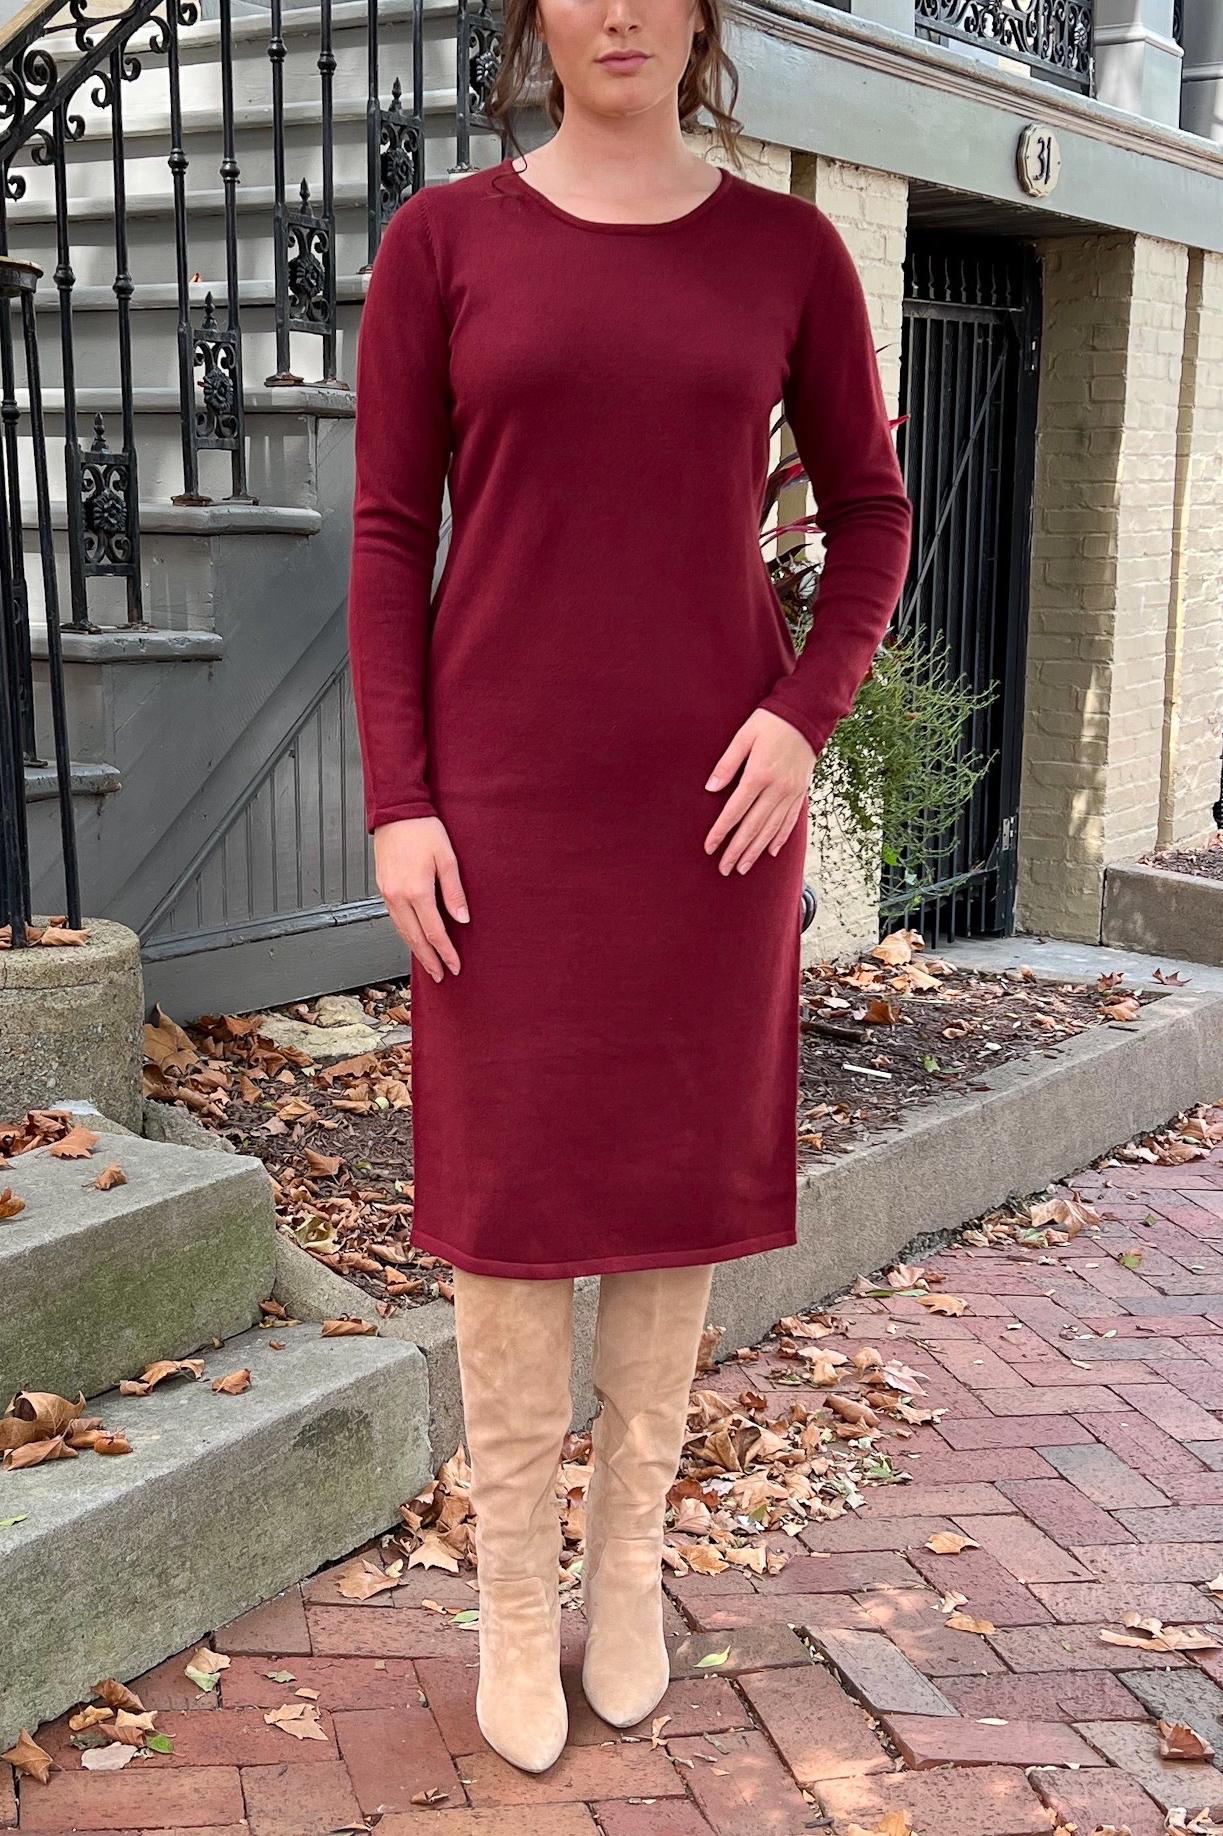 THE QUINN EVERYDAY SCOOP NECK SWEATER DRESS IN BURGUNDY (FINAL SALE)